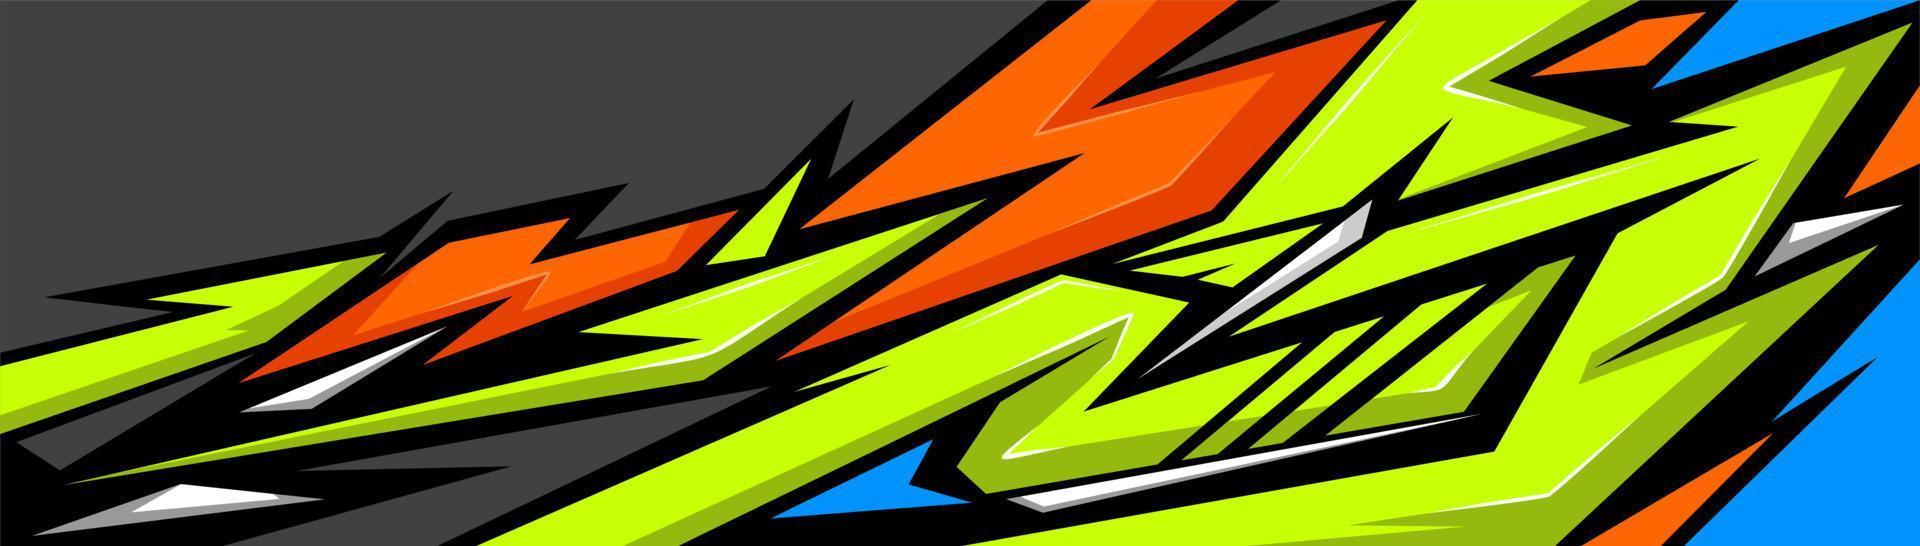 abstract racing background vector